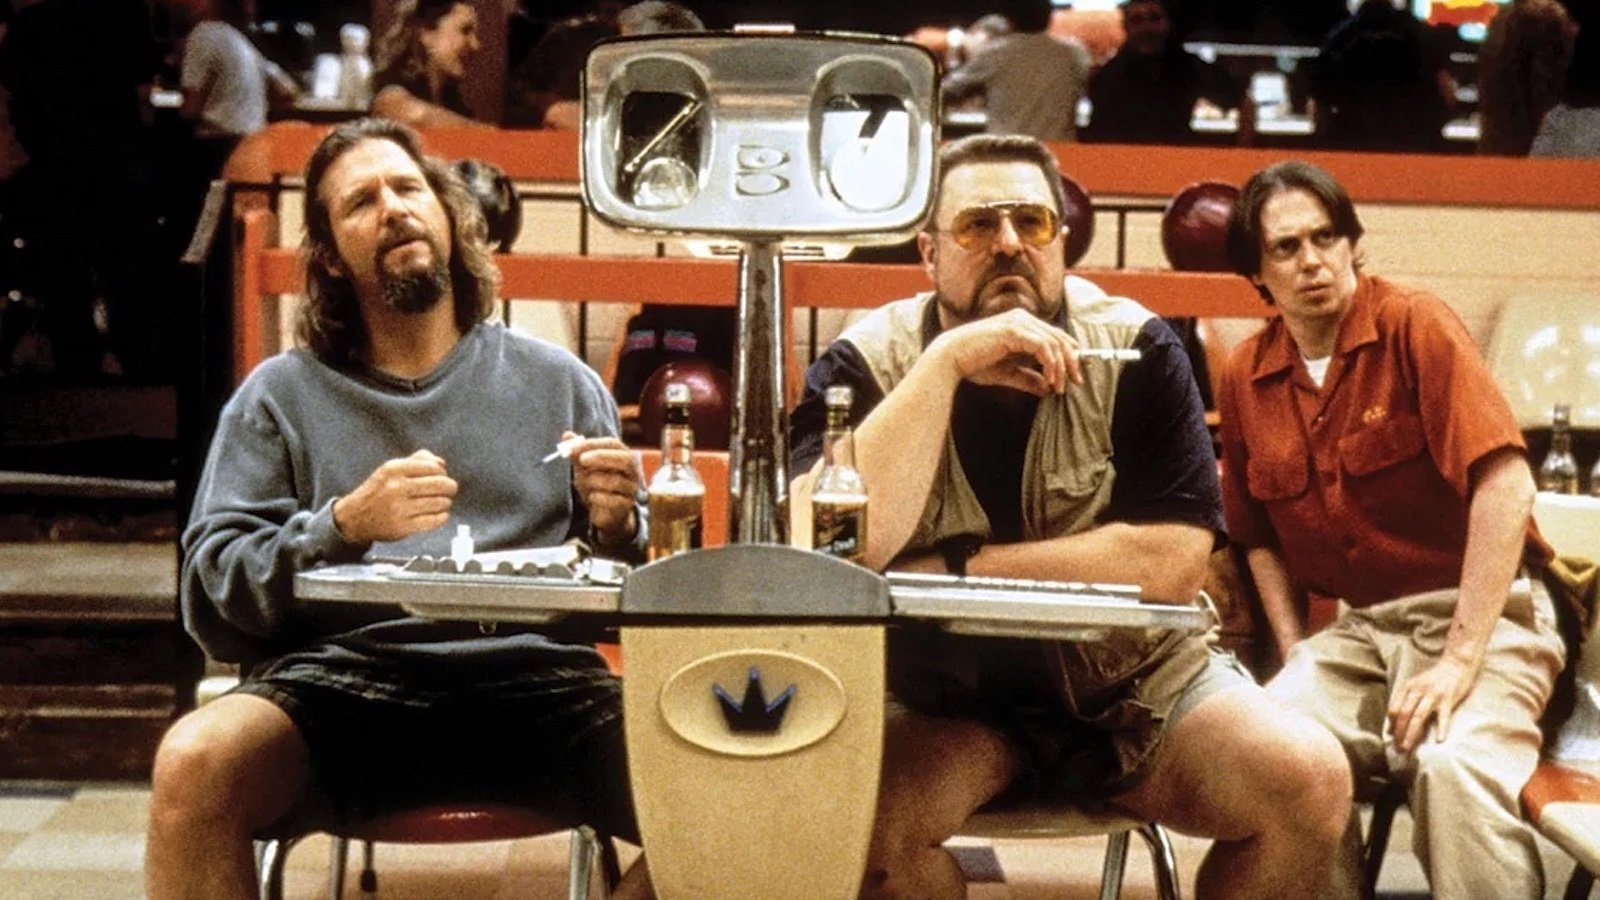 Three men sit at a bowling alley lane booth, two wearing shorts and one in khakis looking past us quizzically.